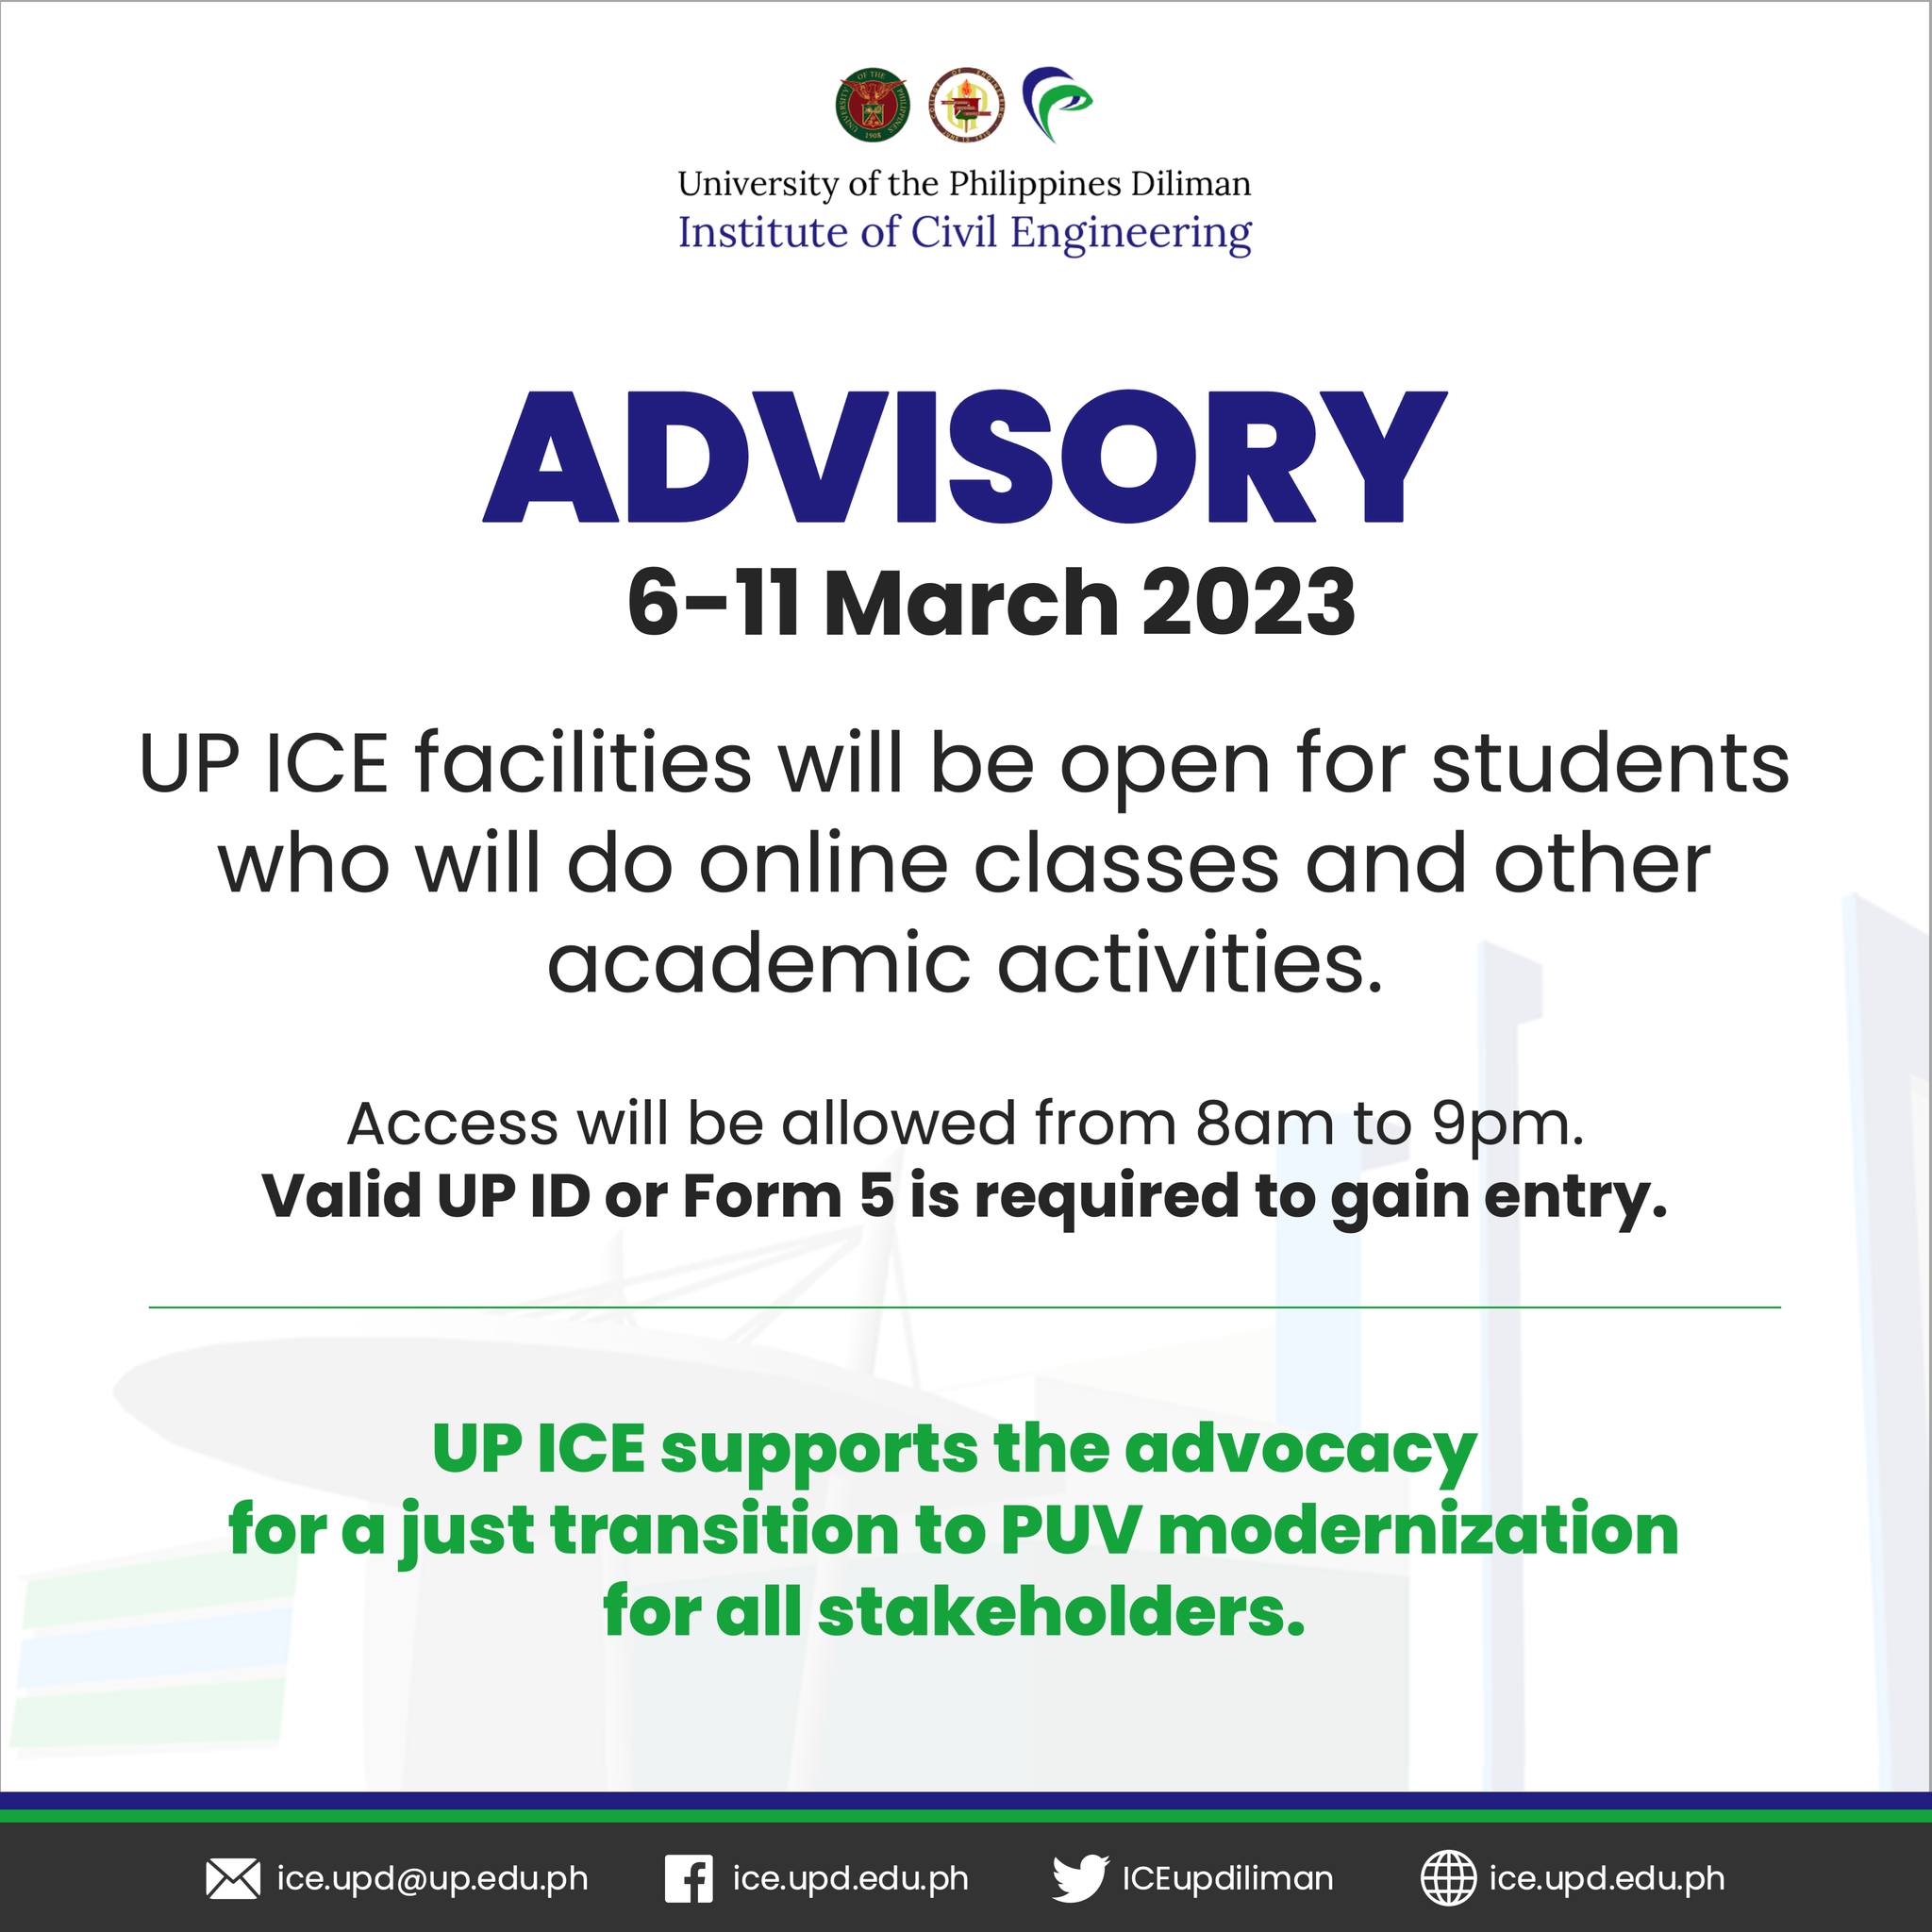 [Advisory] Access to UP ICE facilities on 06-11 March 2023